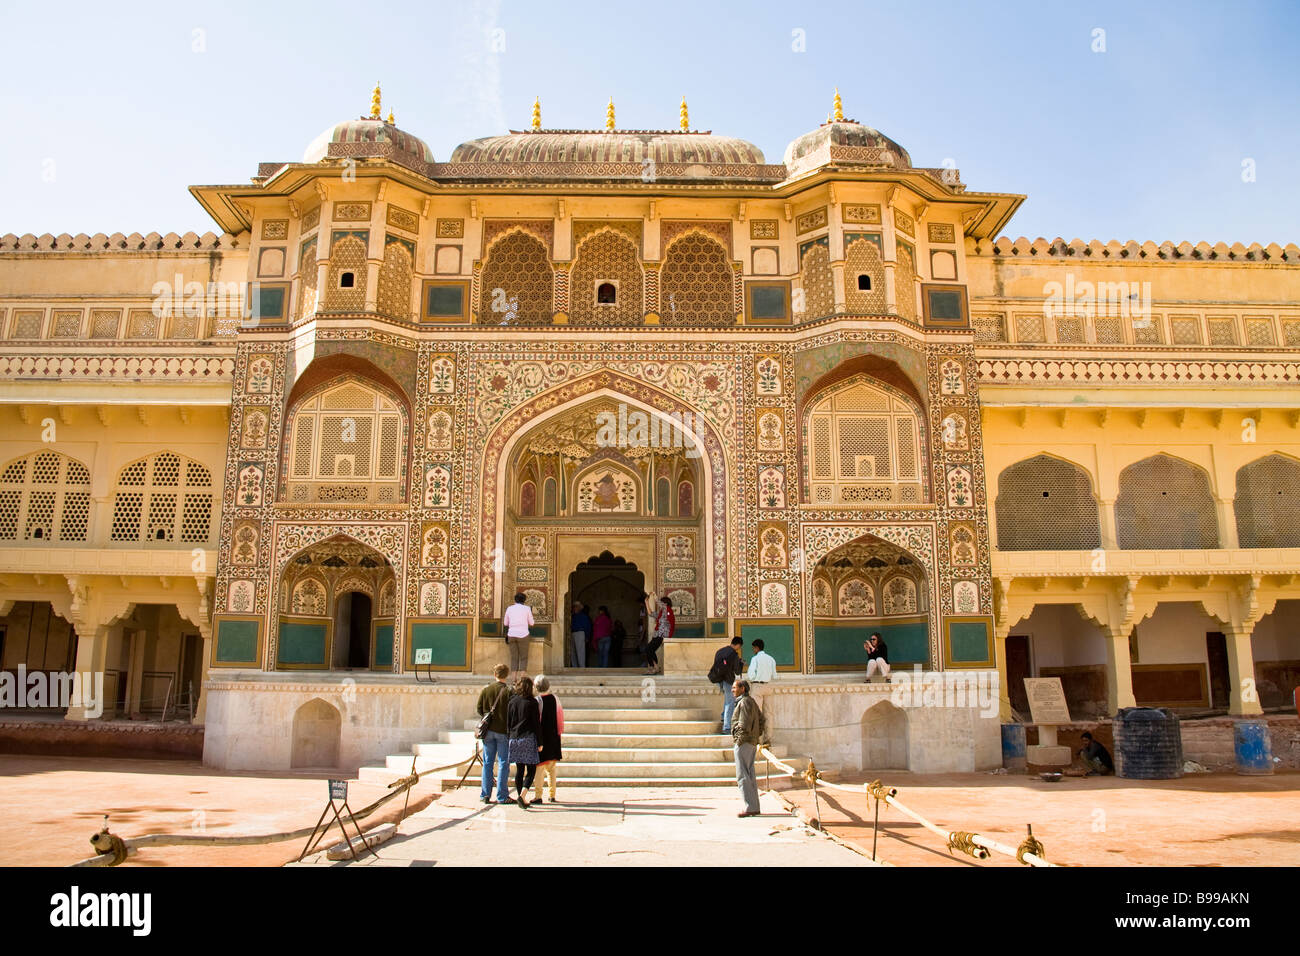 Image result for amber palace rajasthan